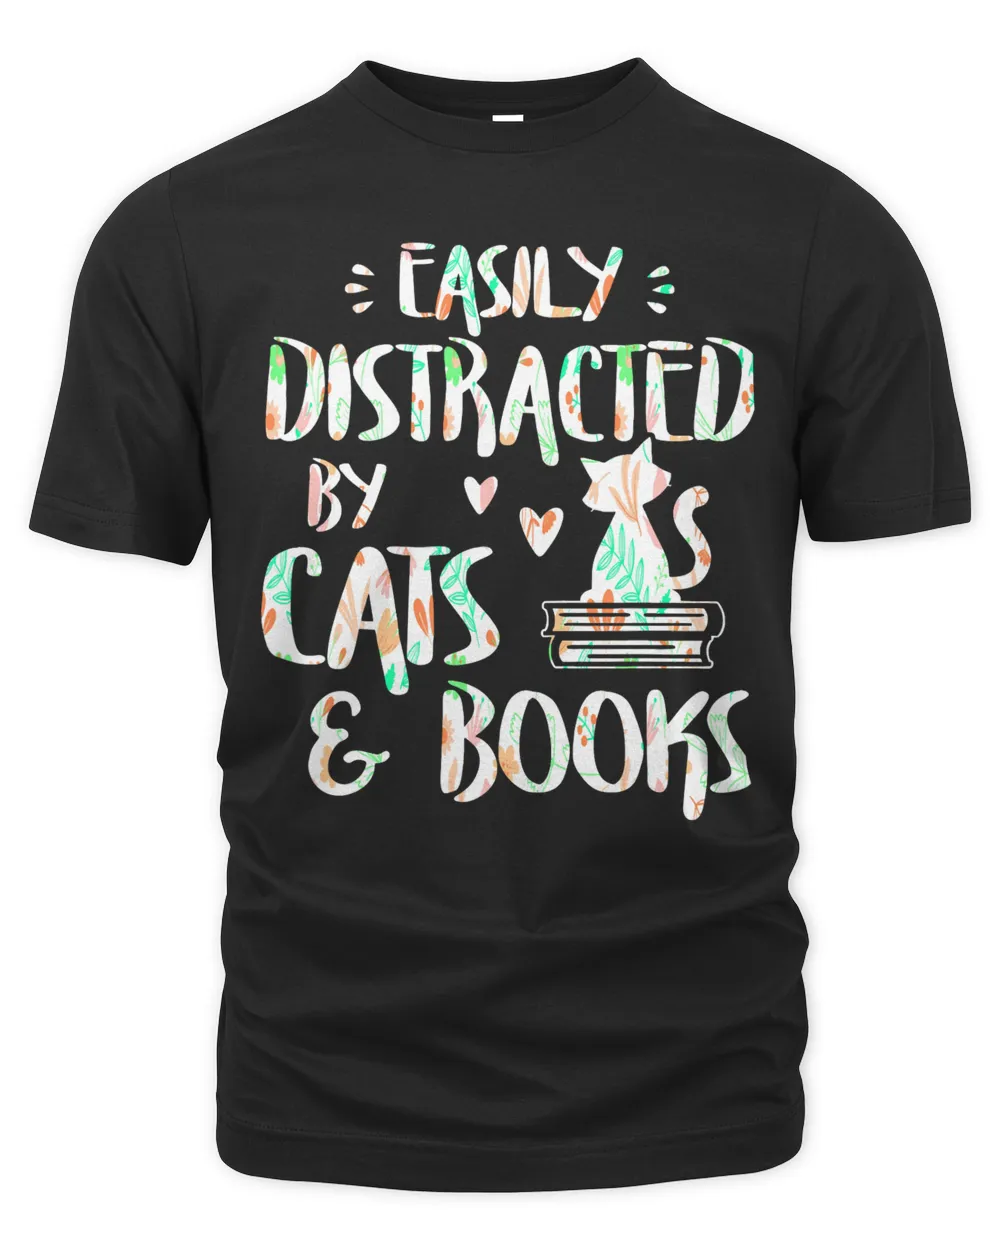 Easily Distracted by Cats and Books T-Shirt